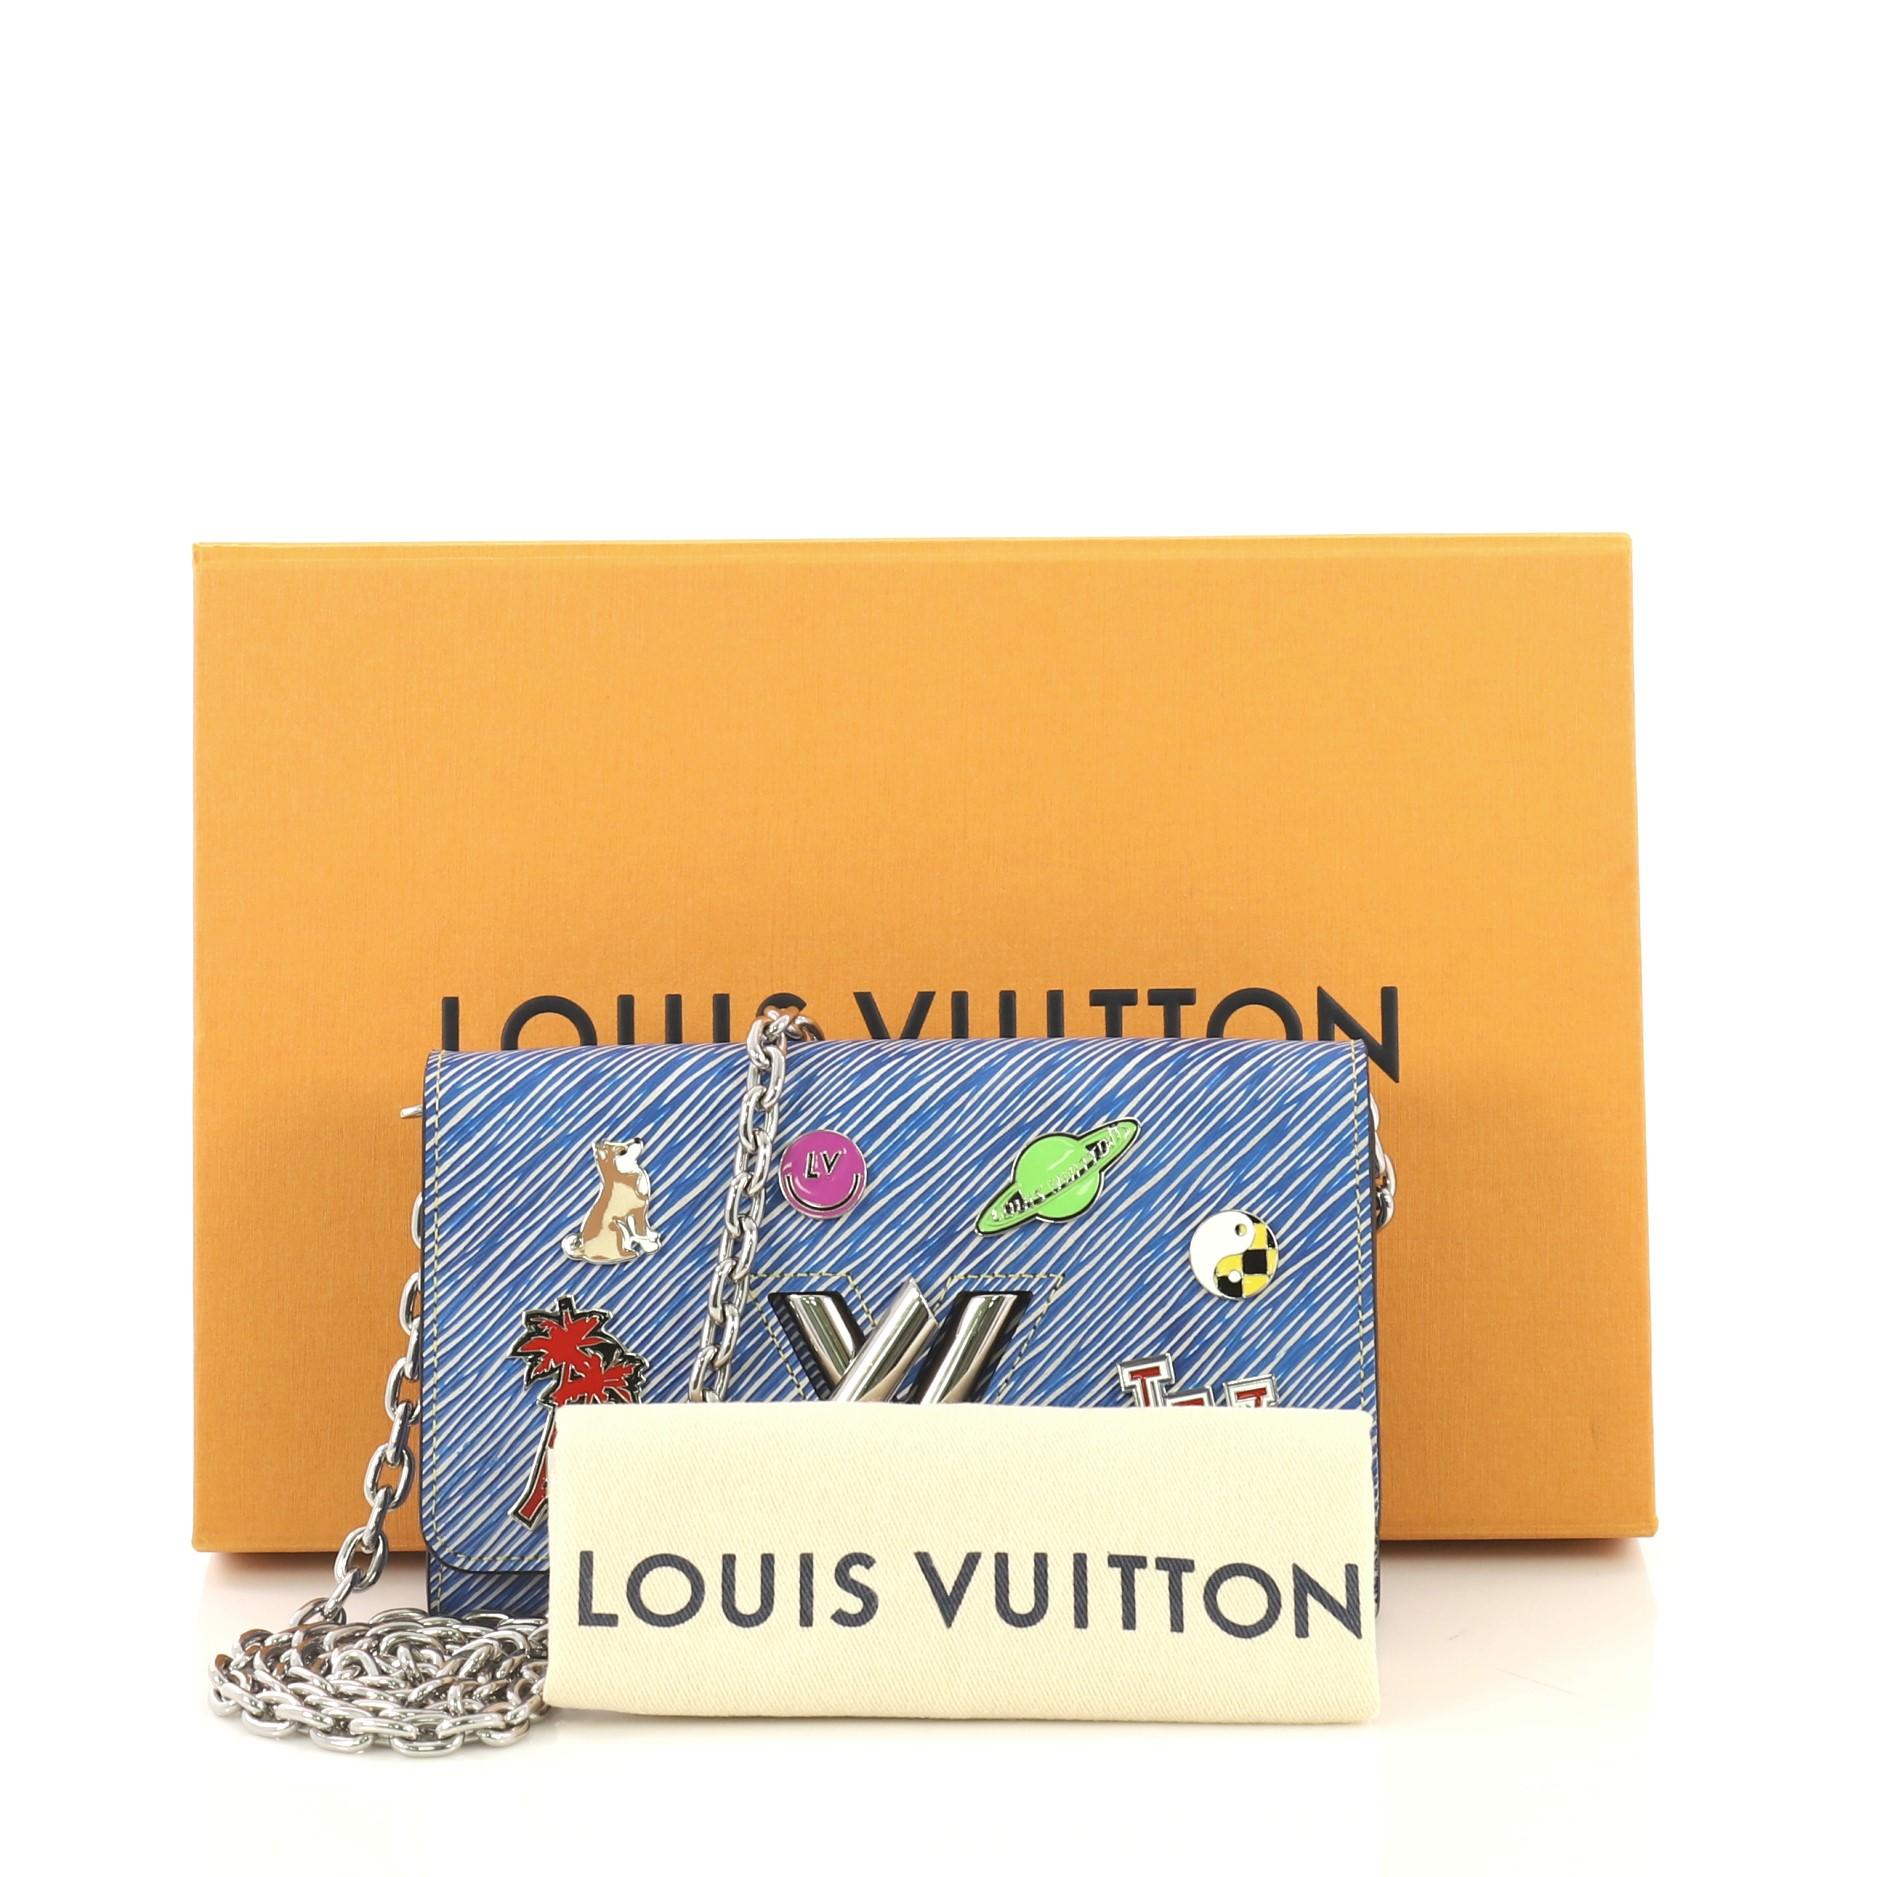 This Louis Vuitton Twist Chain Wallet Limited Edition Pin Embellished Epi Leather, crafted from blue epi leather, features a shoulder chain strap, pin embellishments, and silver-tone hardware. Its flap with twist lock closure opens to a gray leather